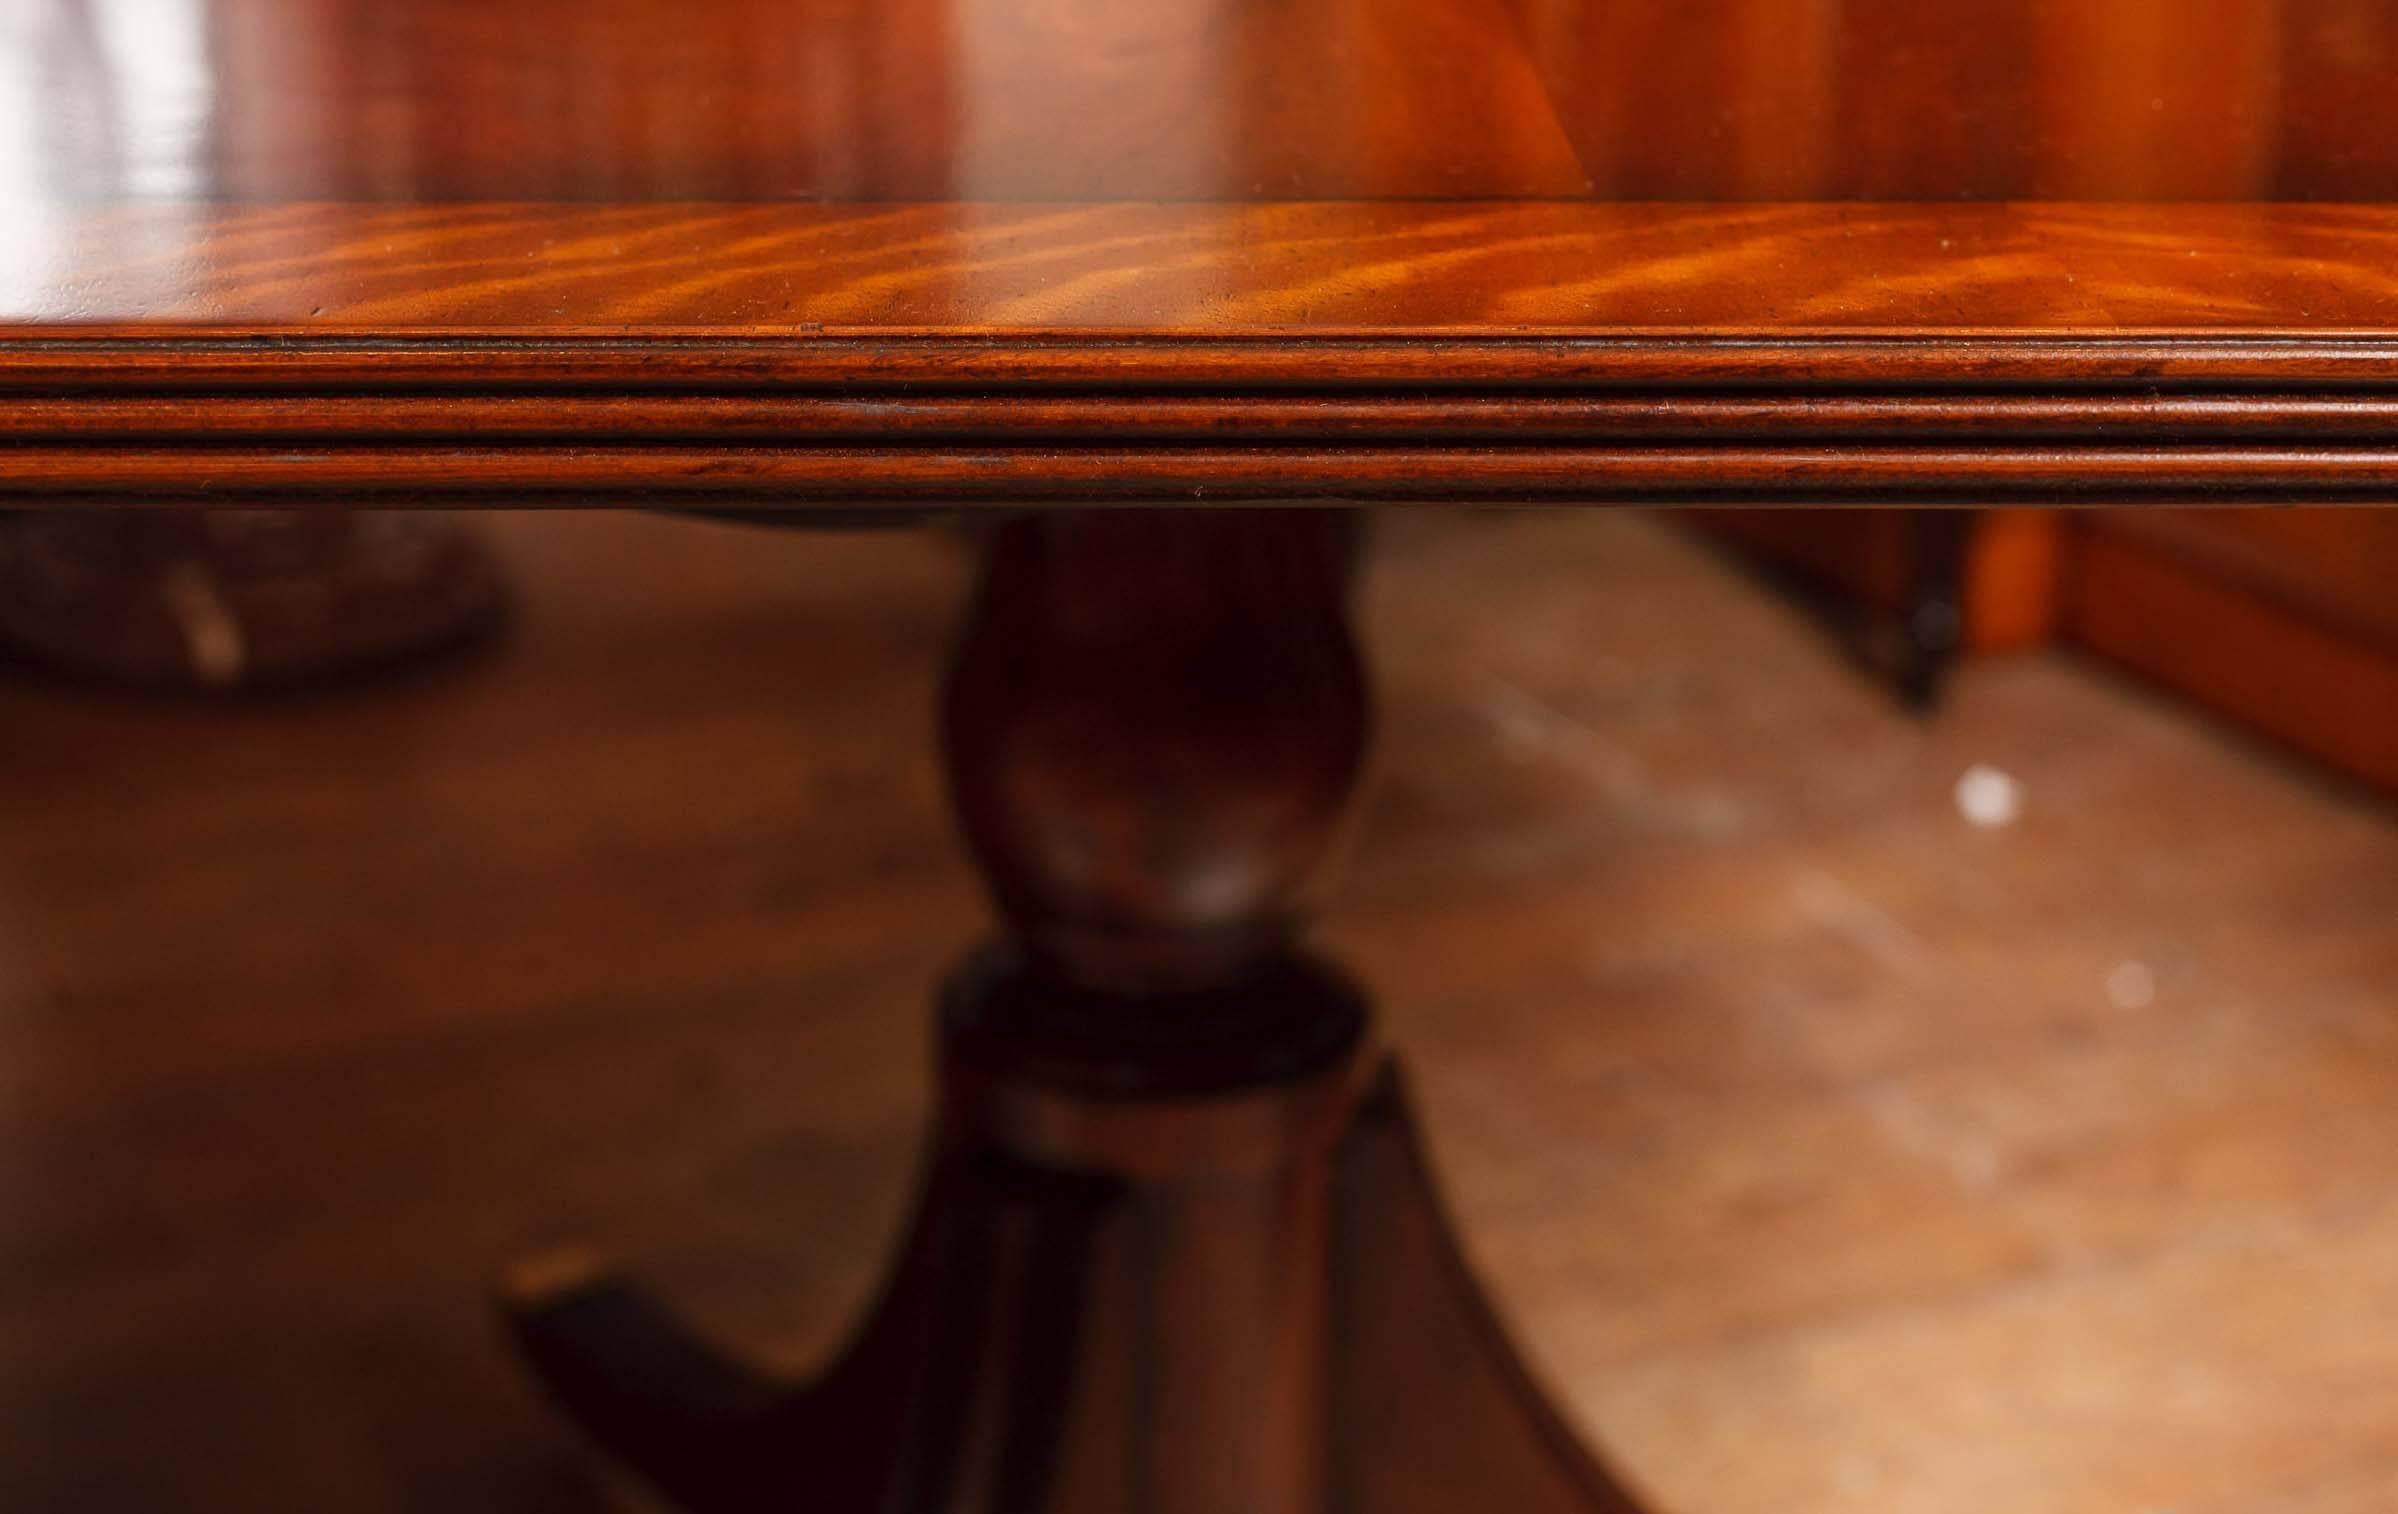 Come view these in our Hertfordshire warehouse, just 25 minutes north of London.
Gorgeous English Regency style extending pedestal dining table in mahogany
features a satinwood trim or crossbanding to the perimeter.
Table is 10 feet long when